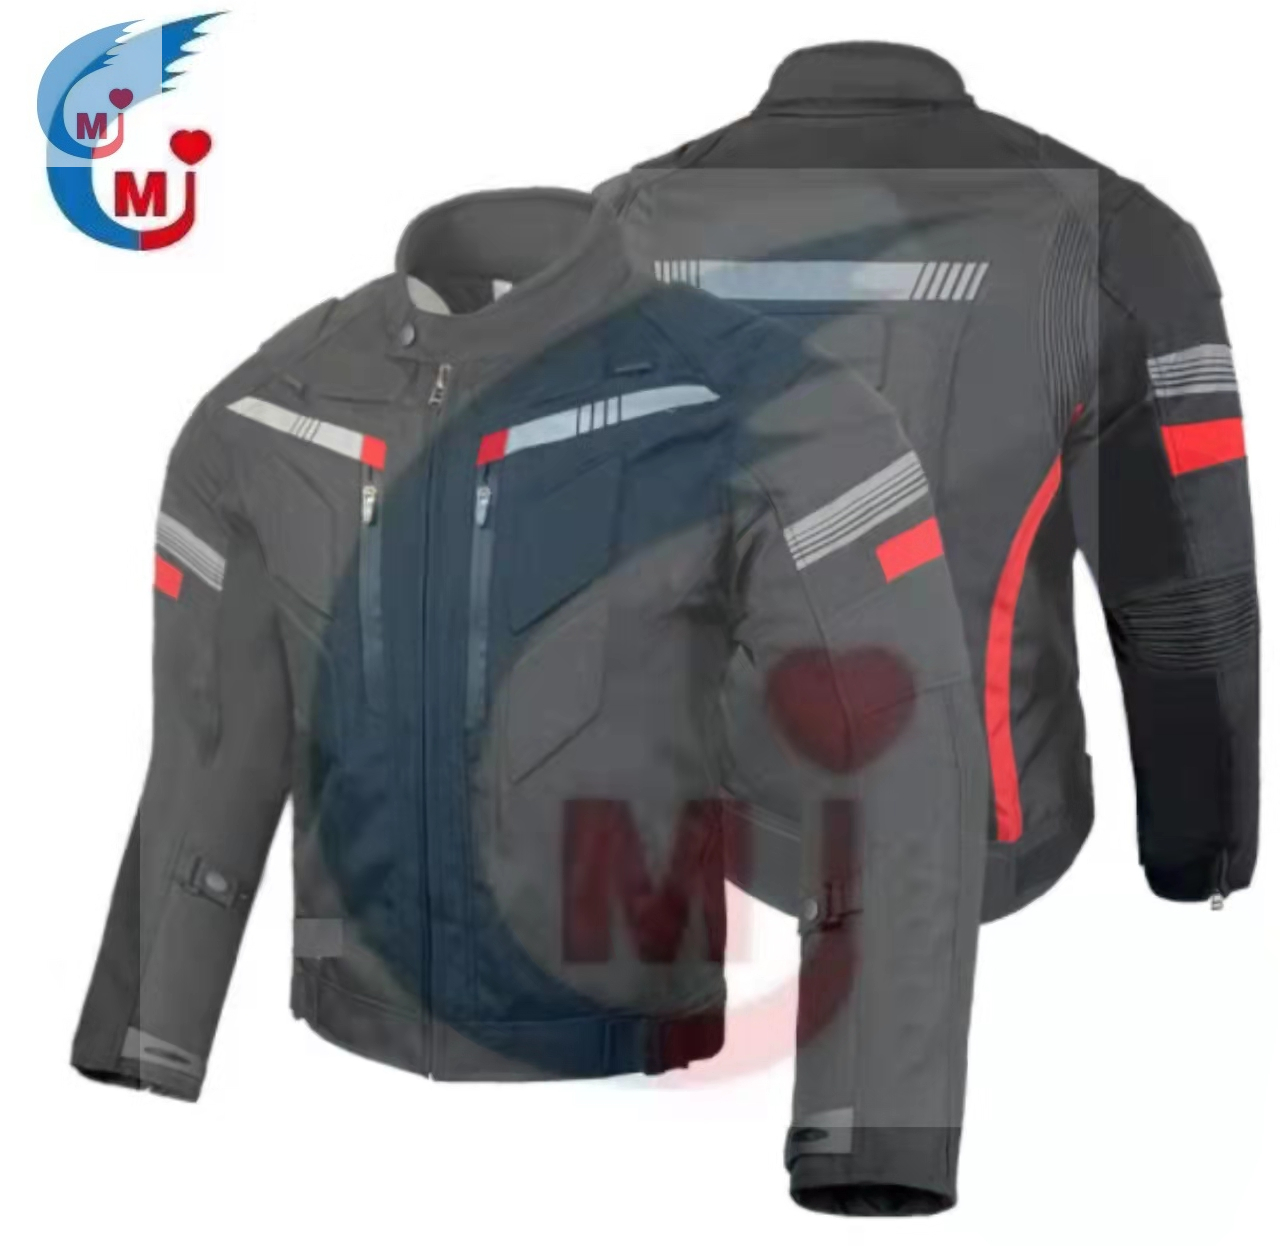 Motorcycle Rider Motorcycle Riding Suit Waterproof Four Seasons Breathable Warm Protection Anti-fall Detachable Liner